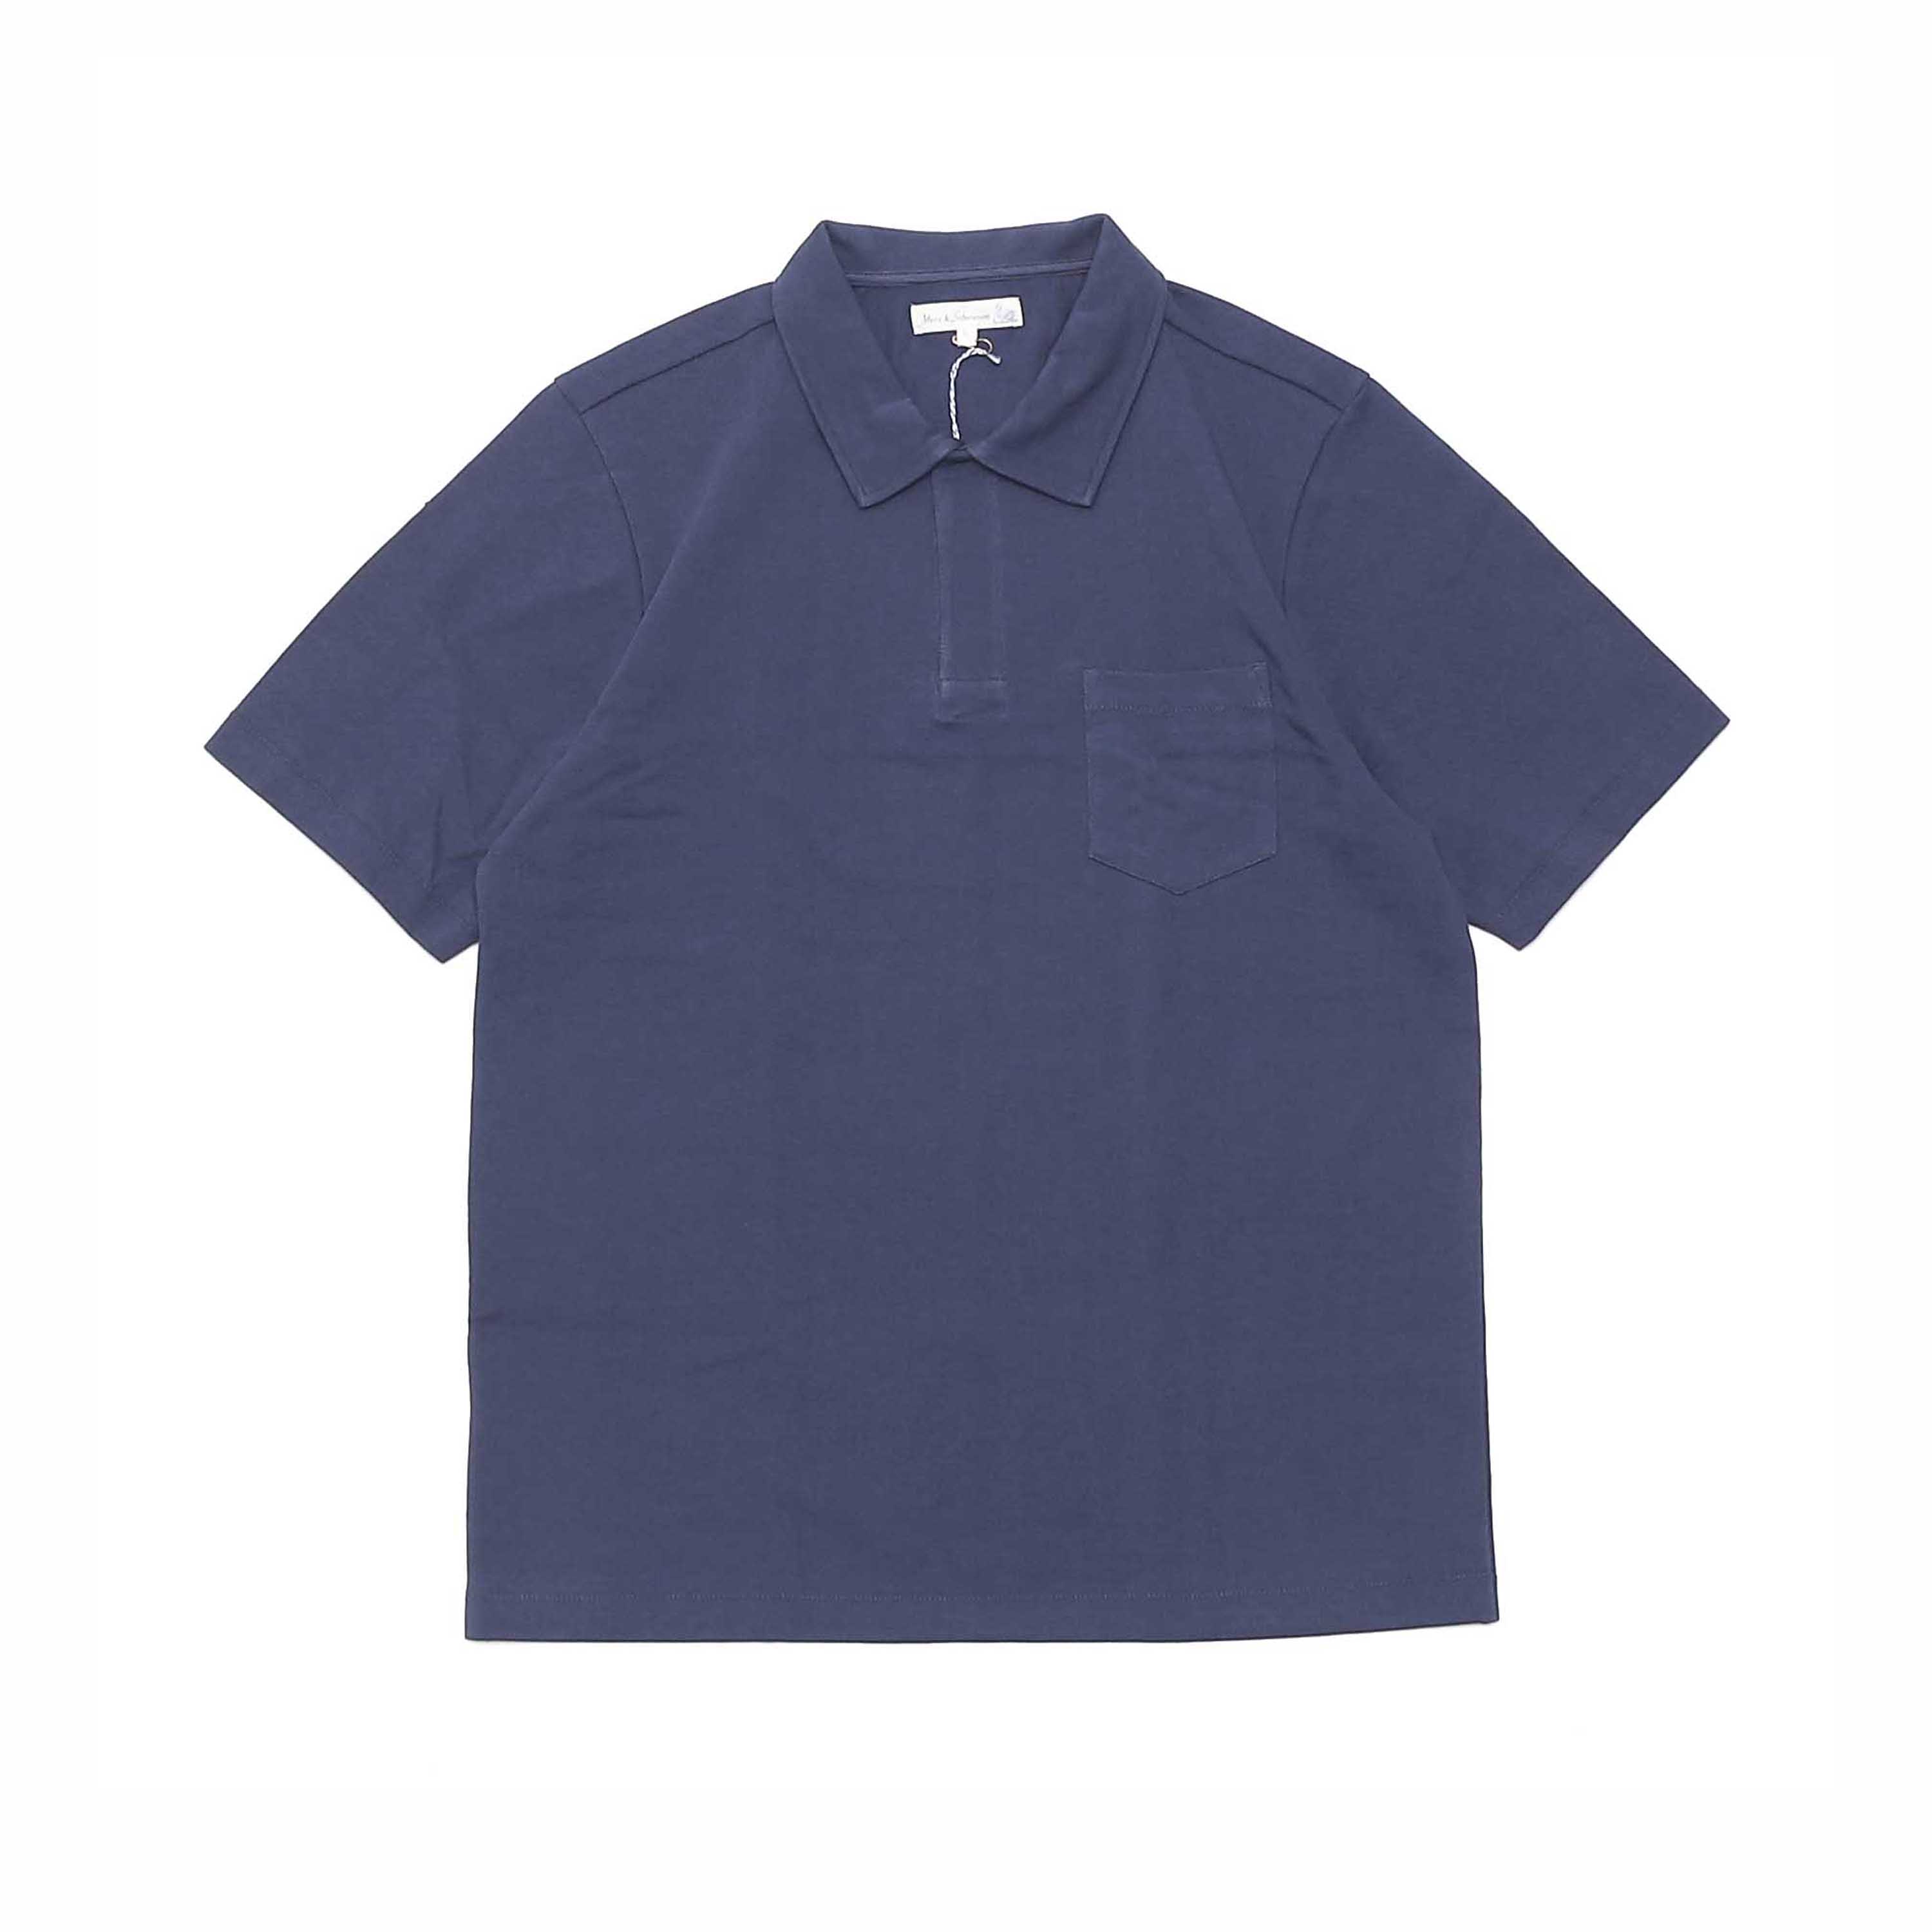 POLO SHIRT WITH POCKET(2PKPL) - PACIFIC